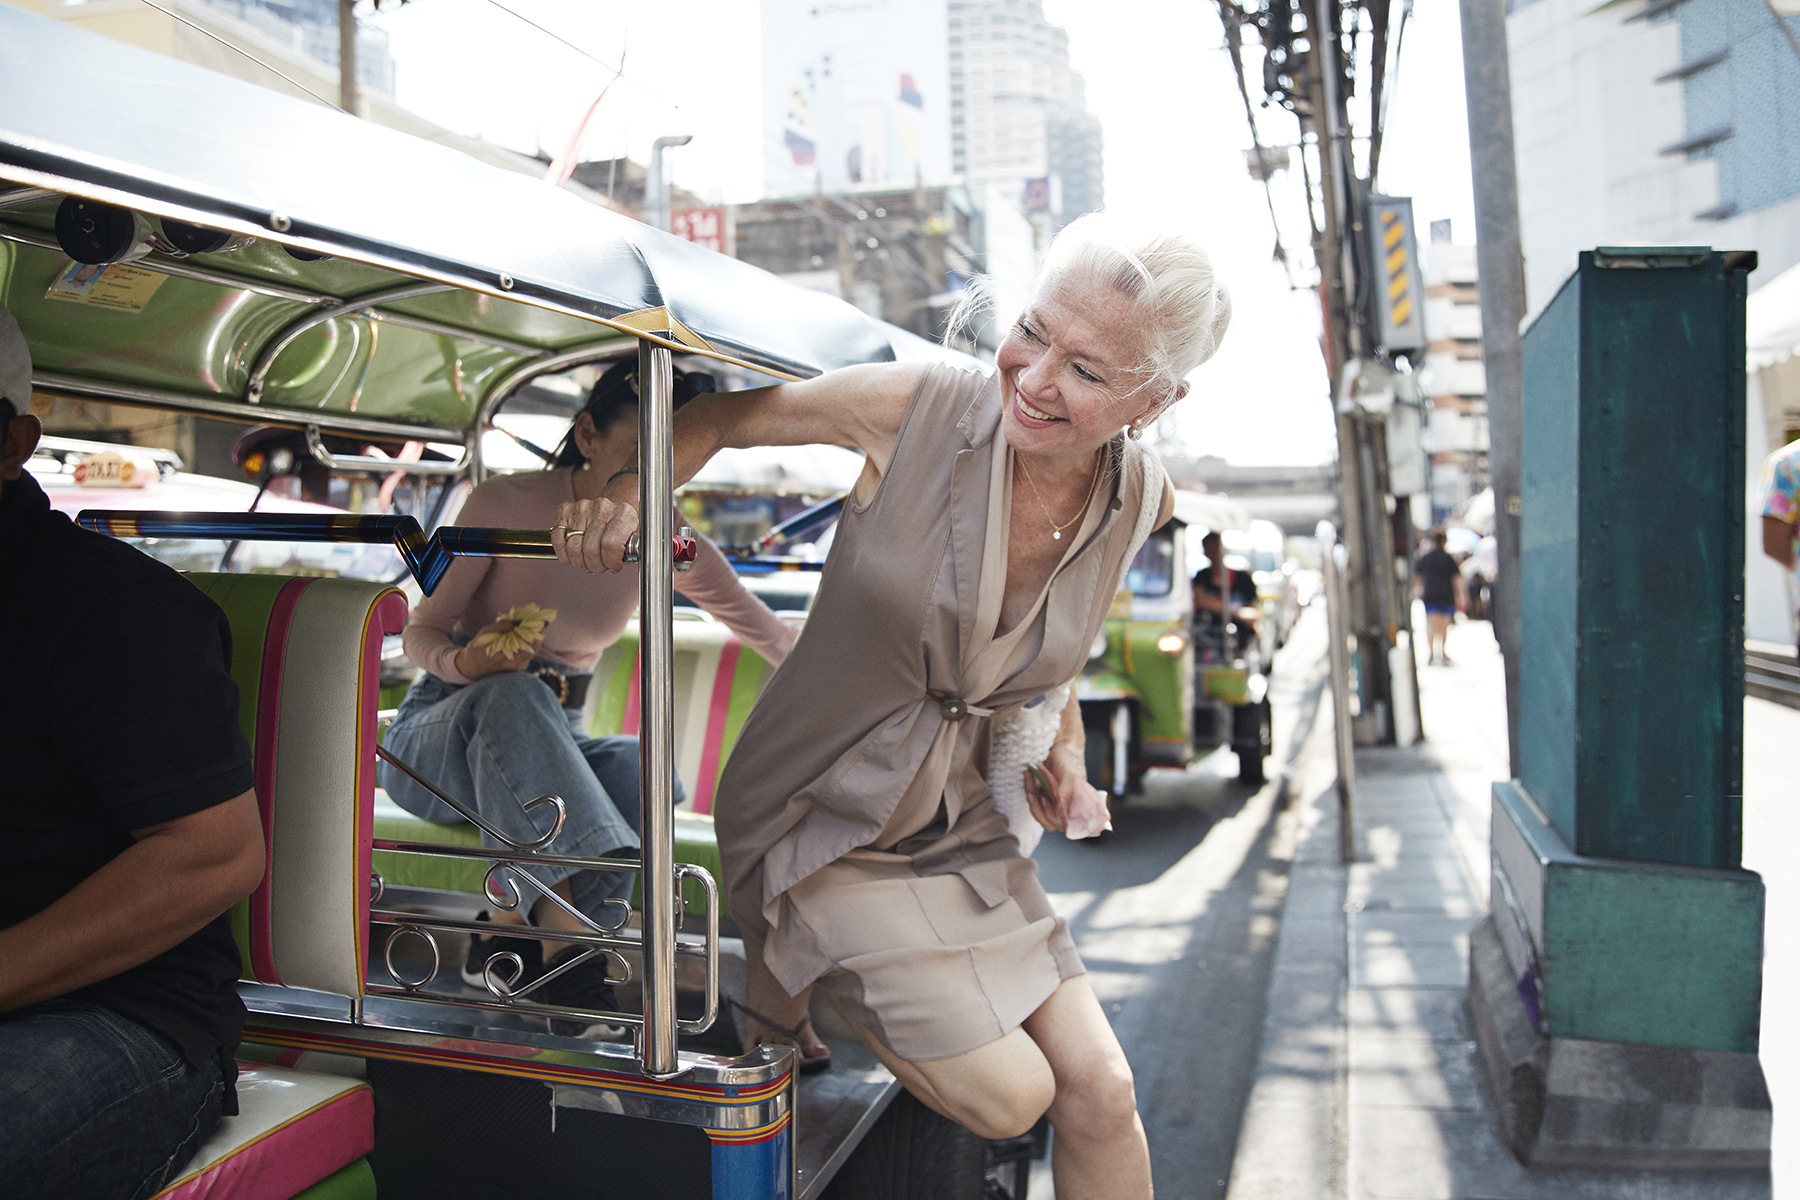 A retired expat woman gets out of a tuk tuk in Thailand

